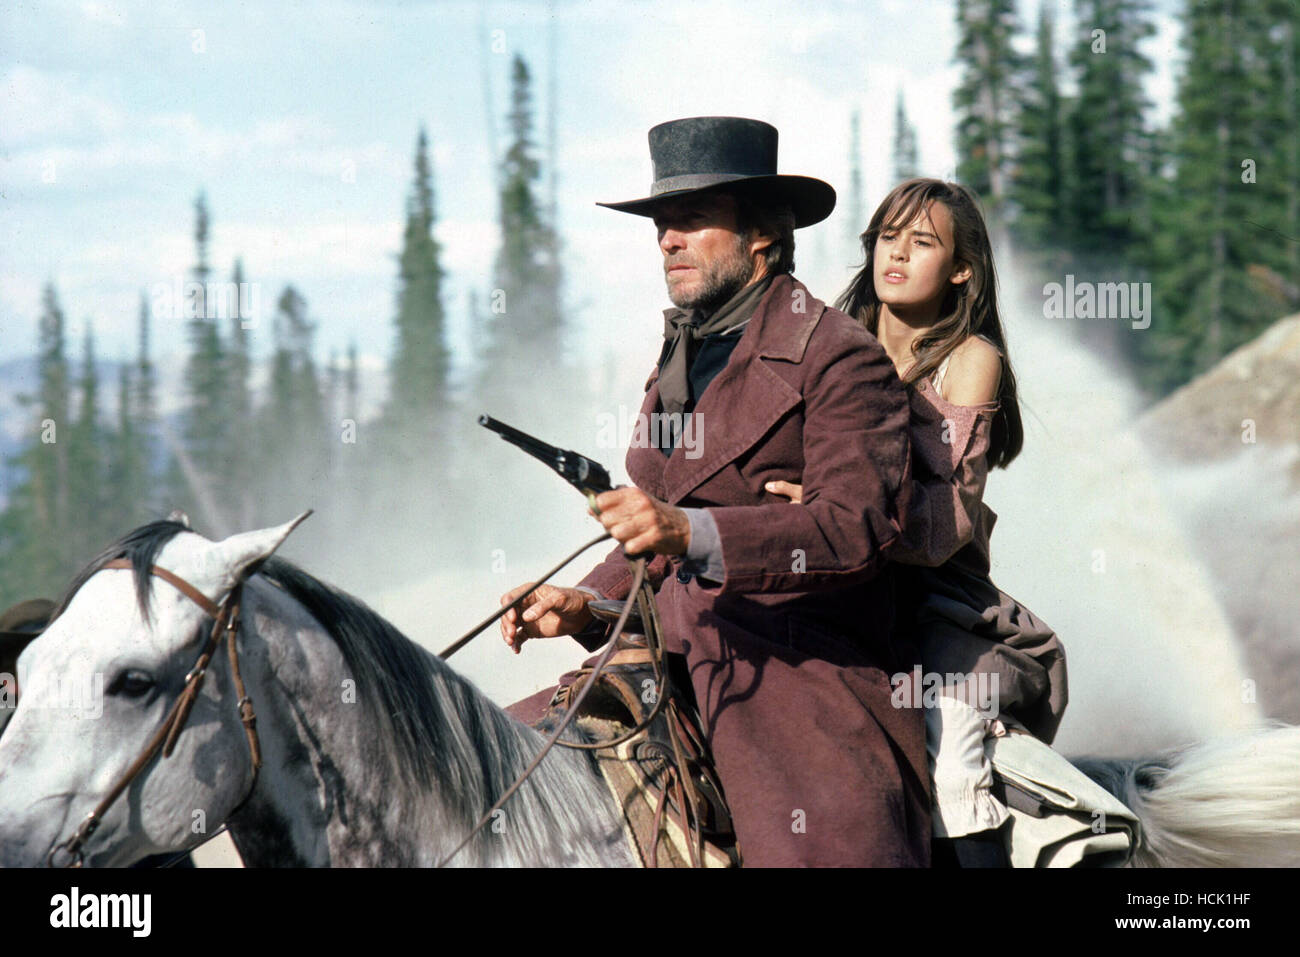 PALE RIDER, Clint Eastwood, Sydney Penny, 1985. ©Warner Bros./Courtesy Everett Collection Stock Photo